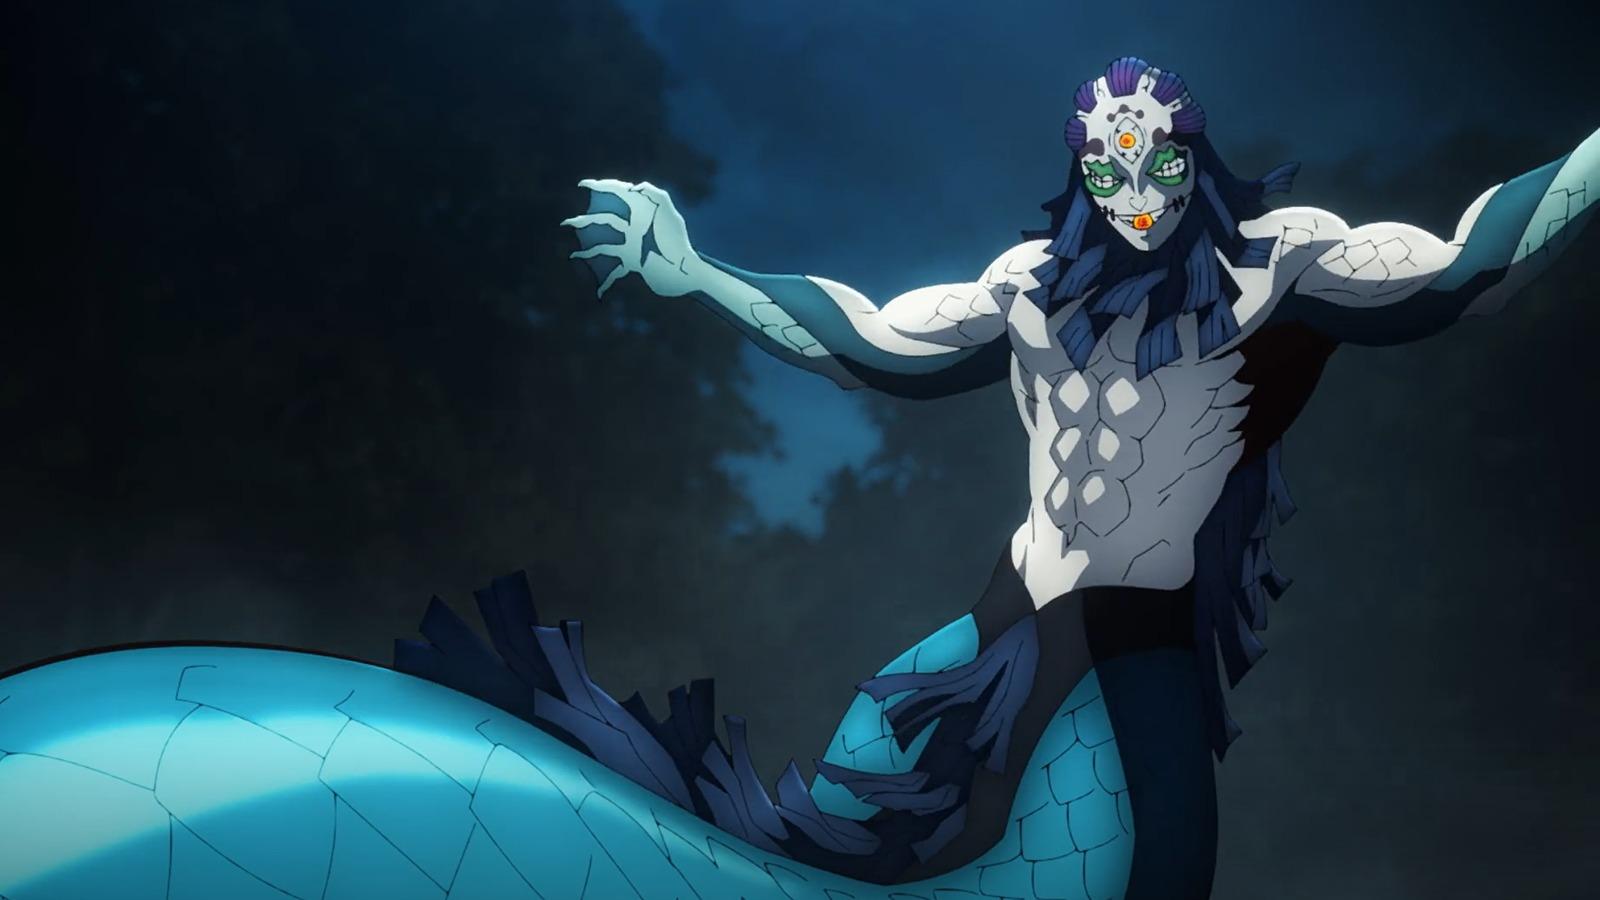 An image featuring Gyokko's true form in Demon Slayer